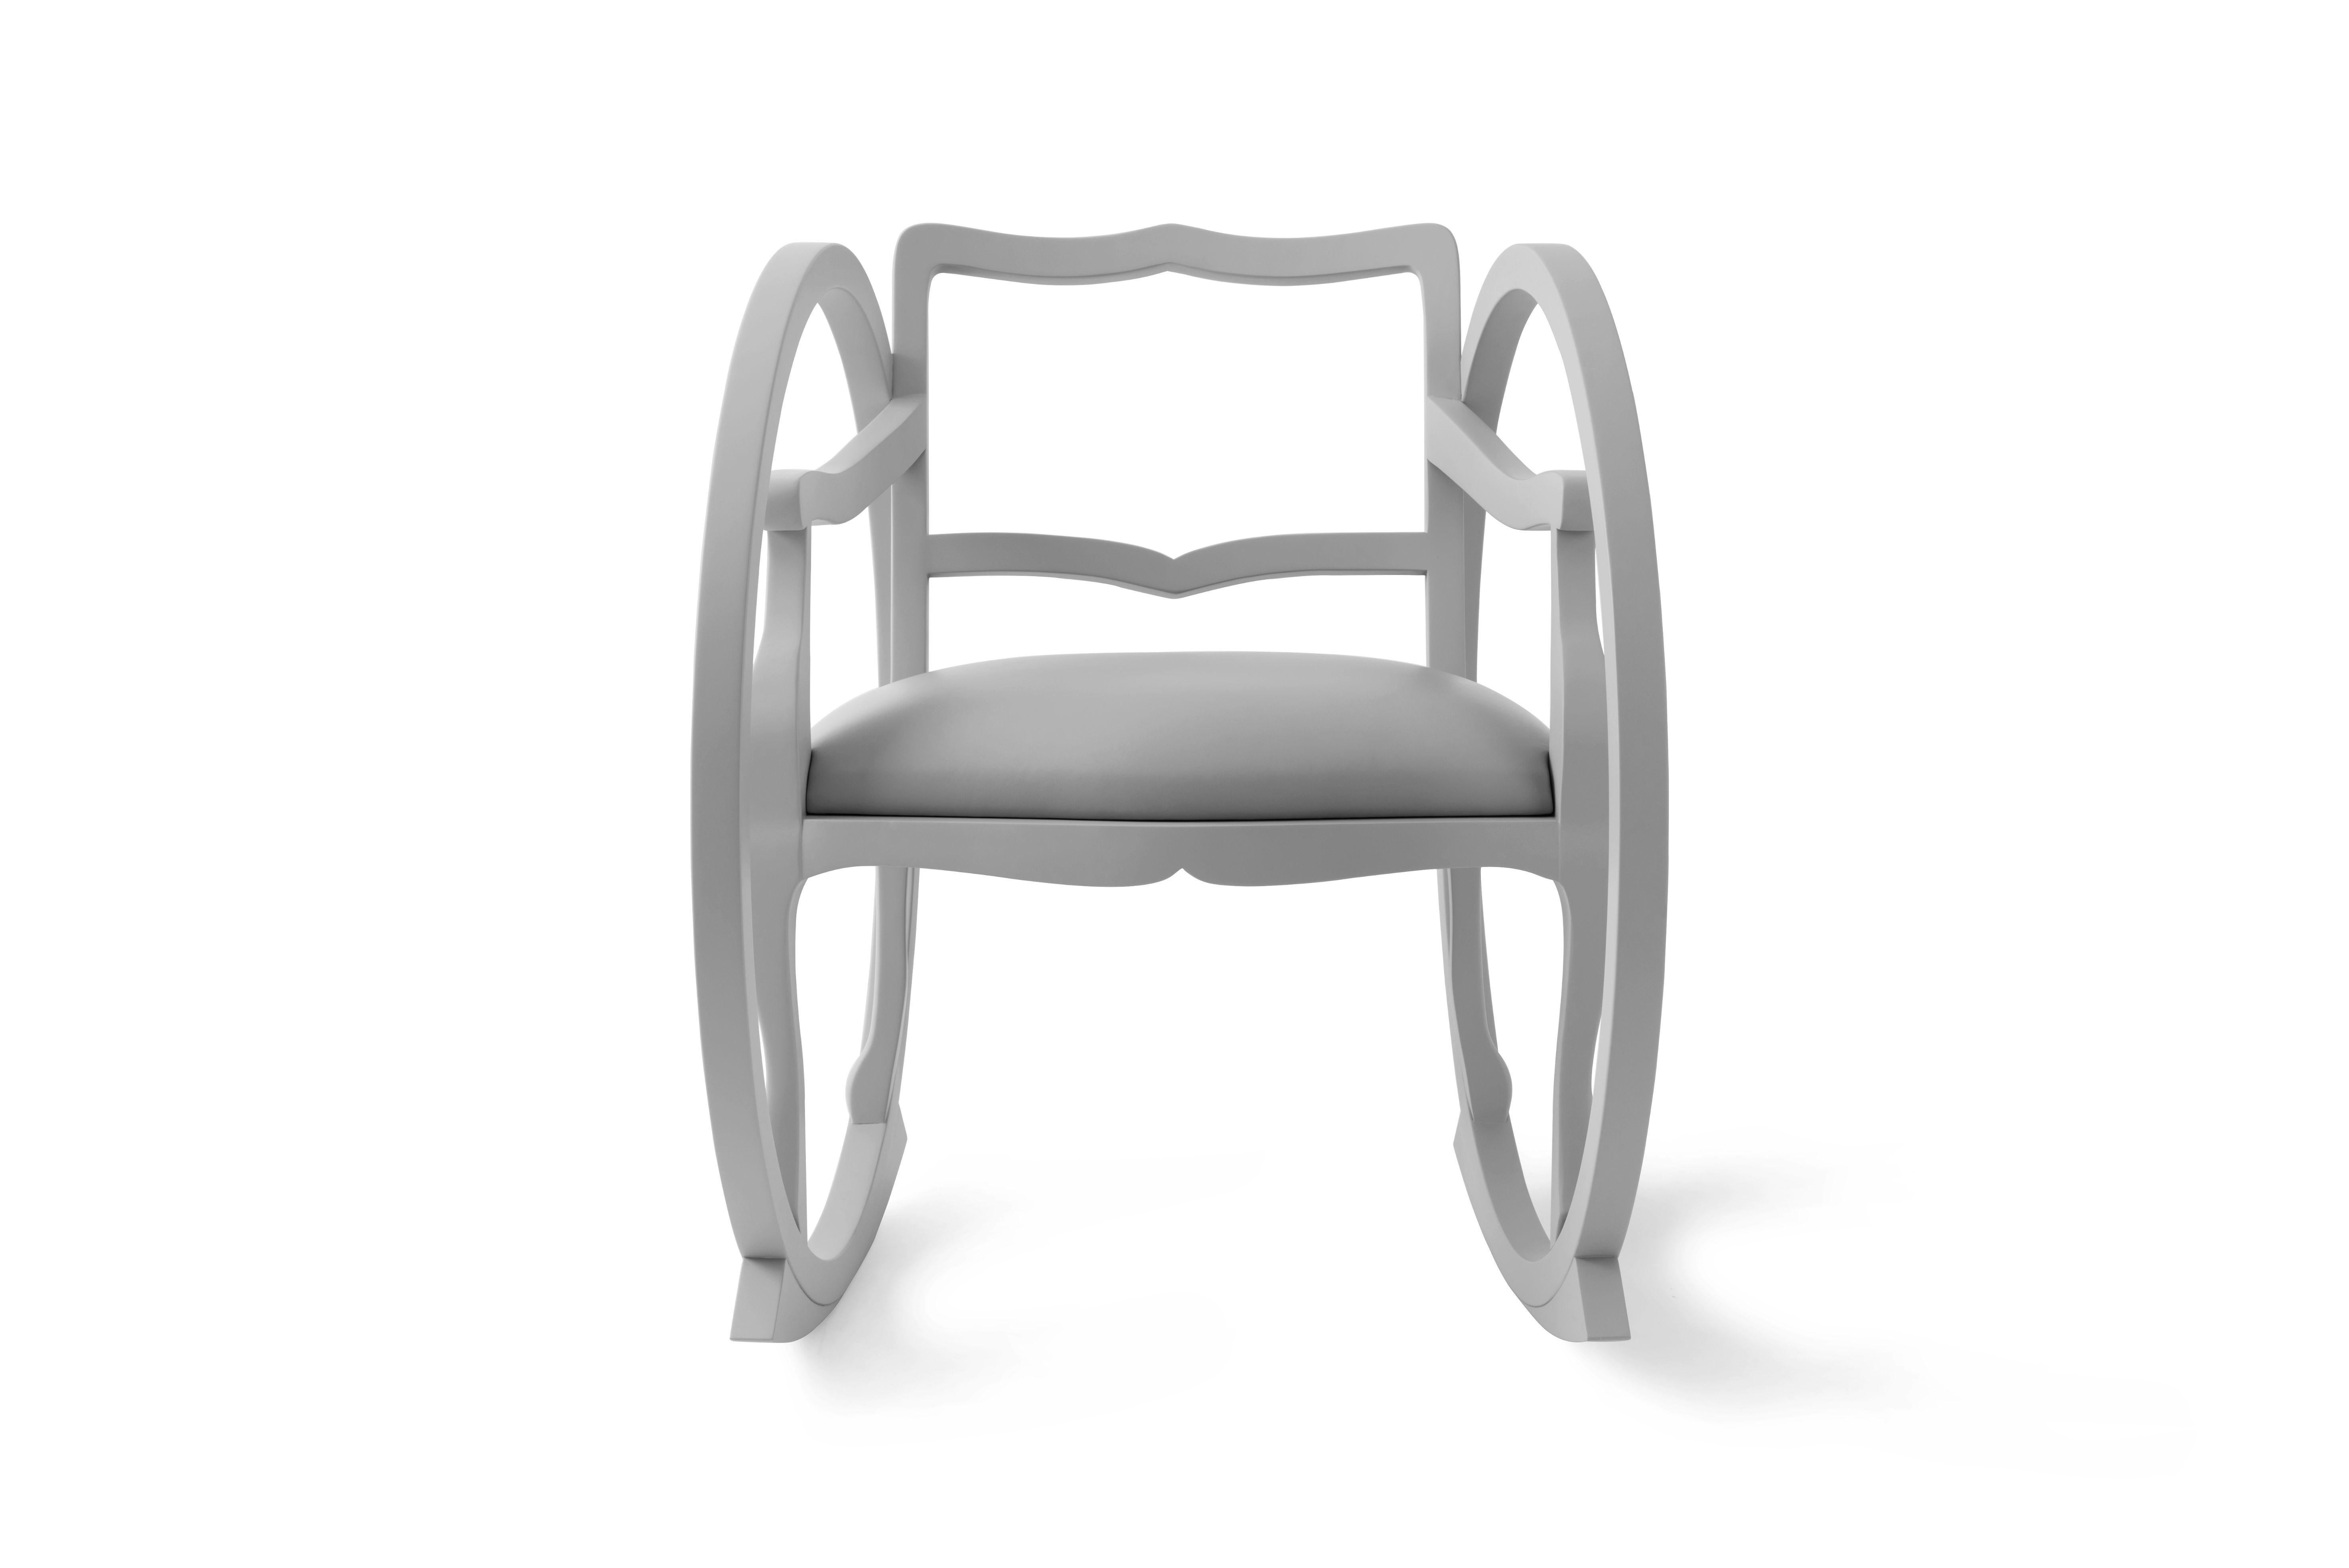 French Contemporary Rocking Chair Designed by Thomas Dariel